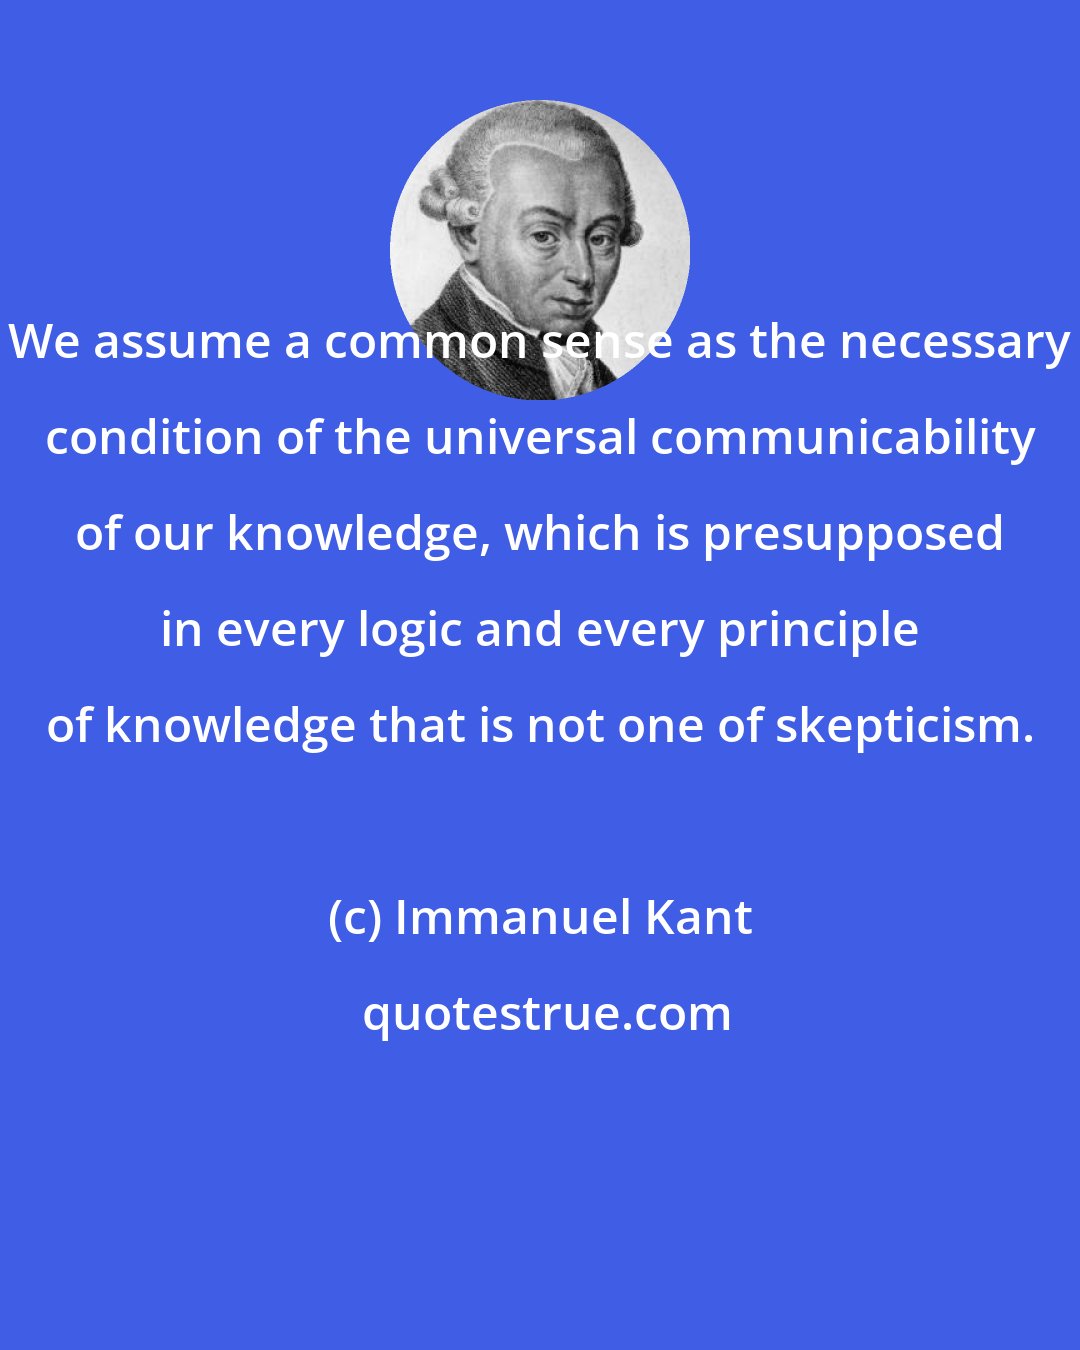 Immanuel Kant: We assume a common sense as the necessary condition of the universal communicability of our knowledge, which is presupposed in every logic and every principle of knowledge that is not one of skepticism.